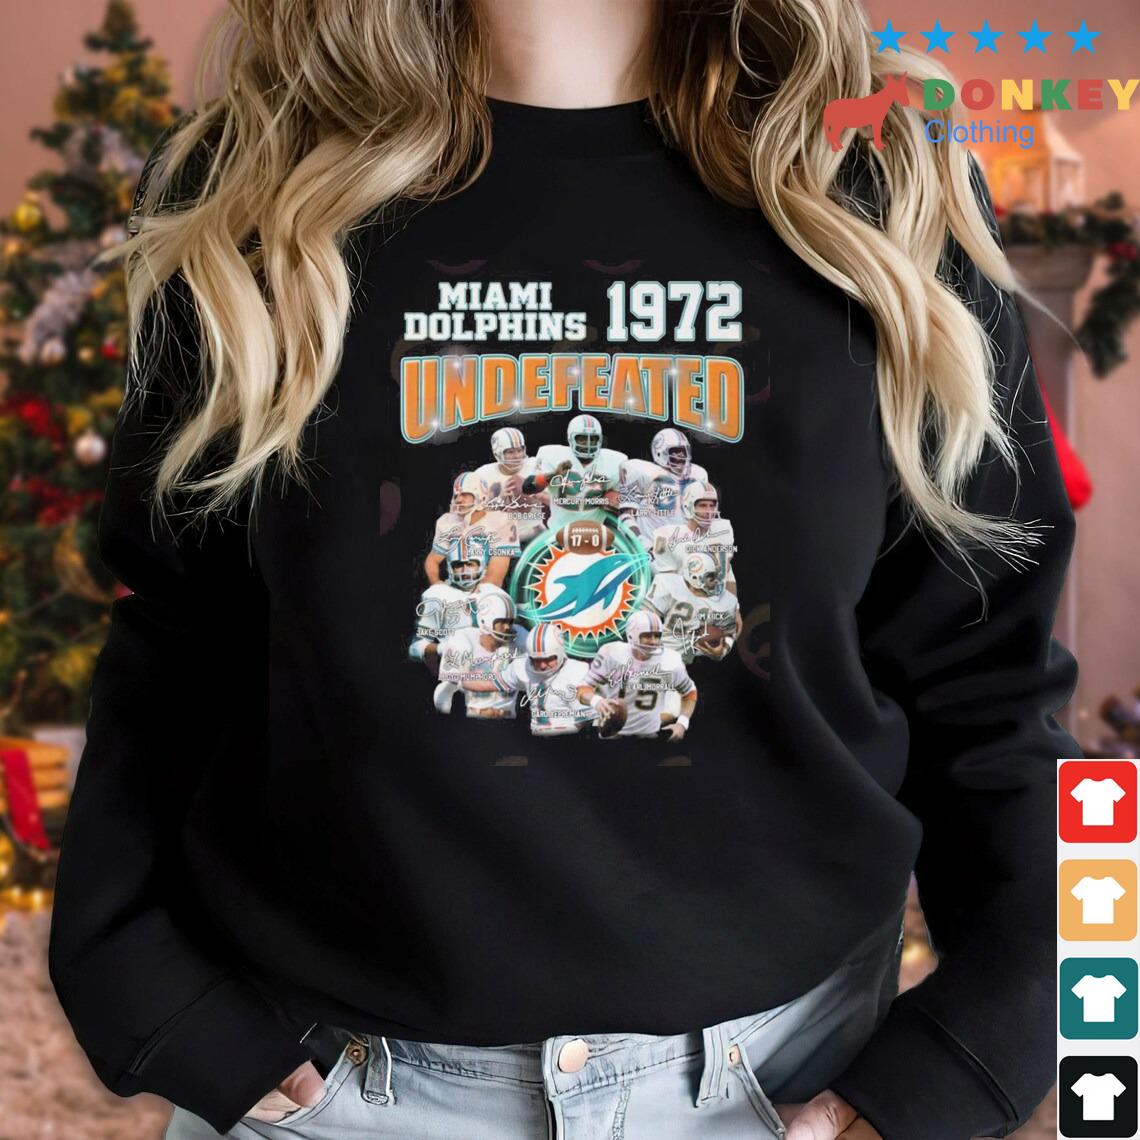 Miami Dolphins 1972 Undefeated Signatures Shirt